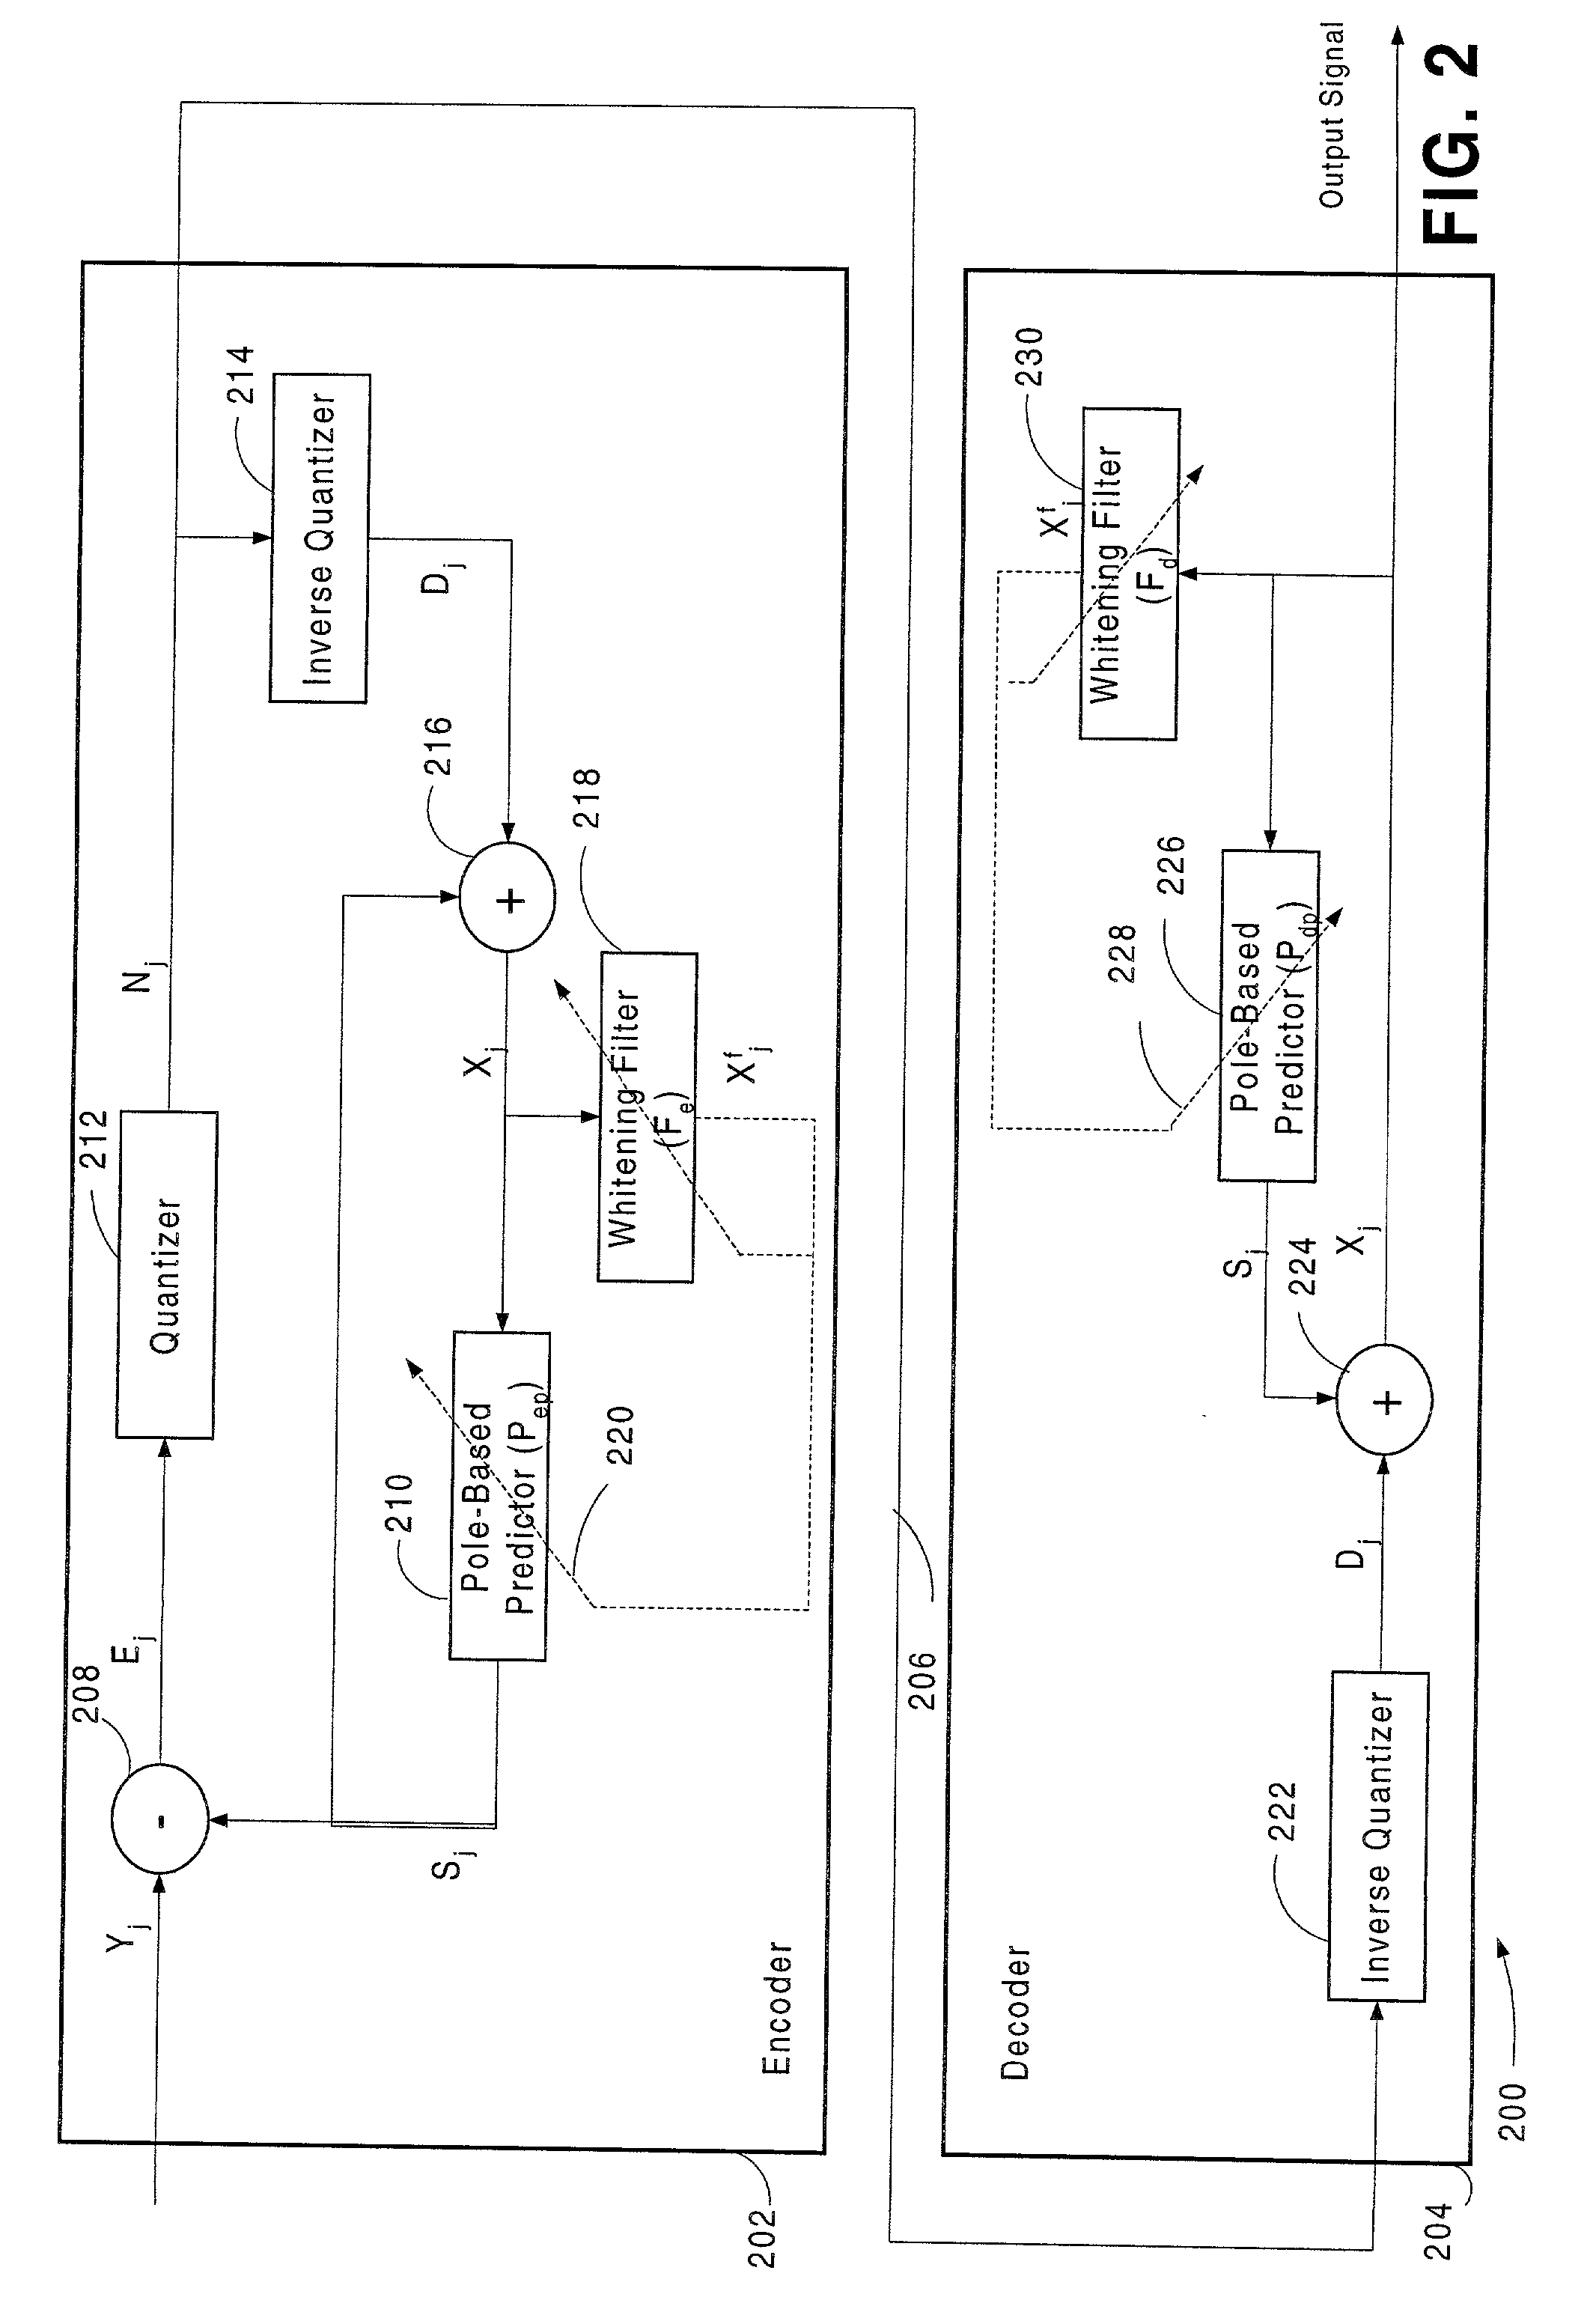 Adaptive differential pulse code modulation system and method utilizing whitening filter for updating of predictor coefficients